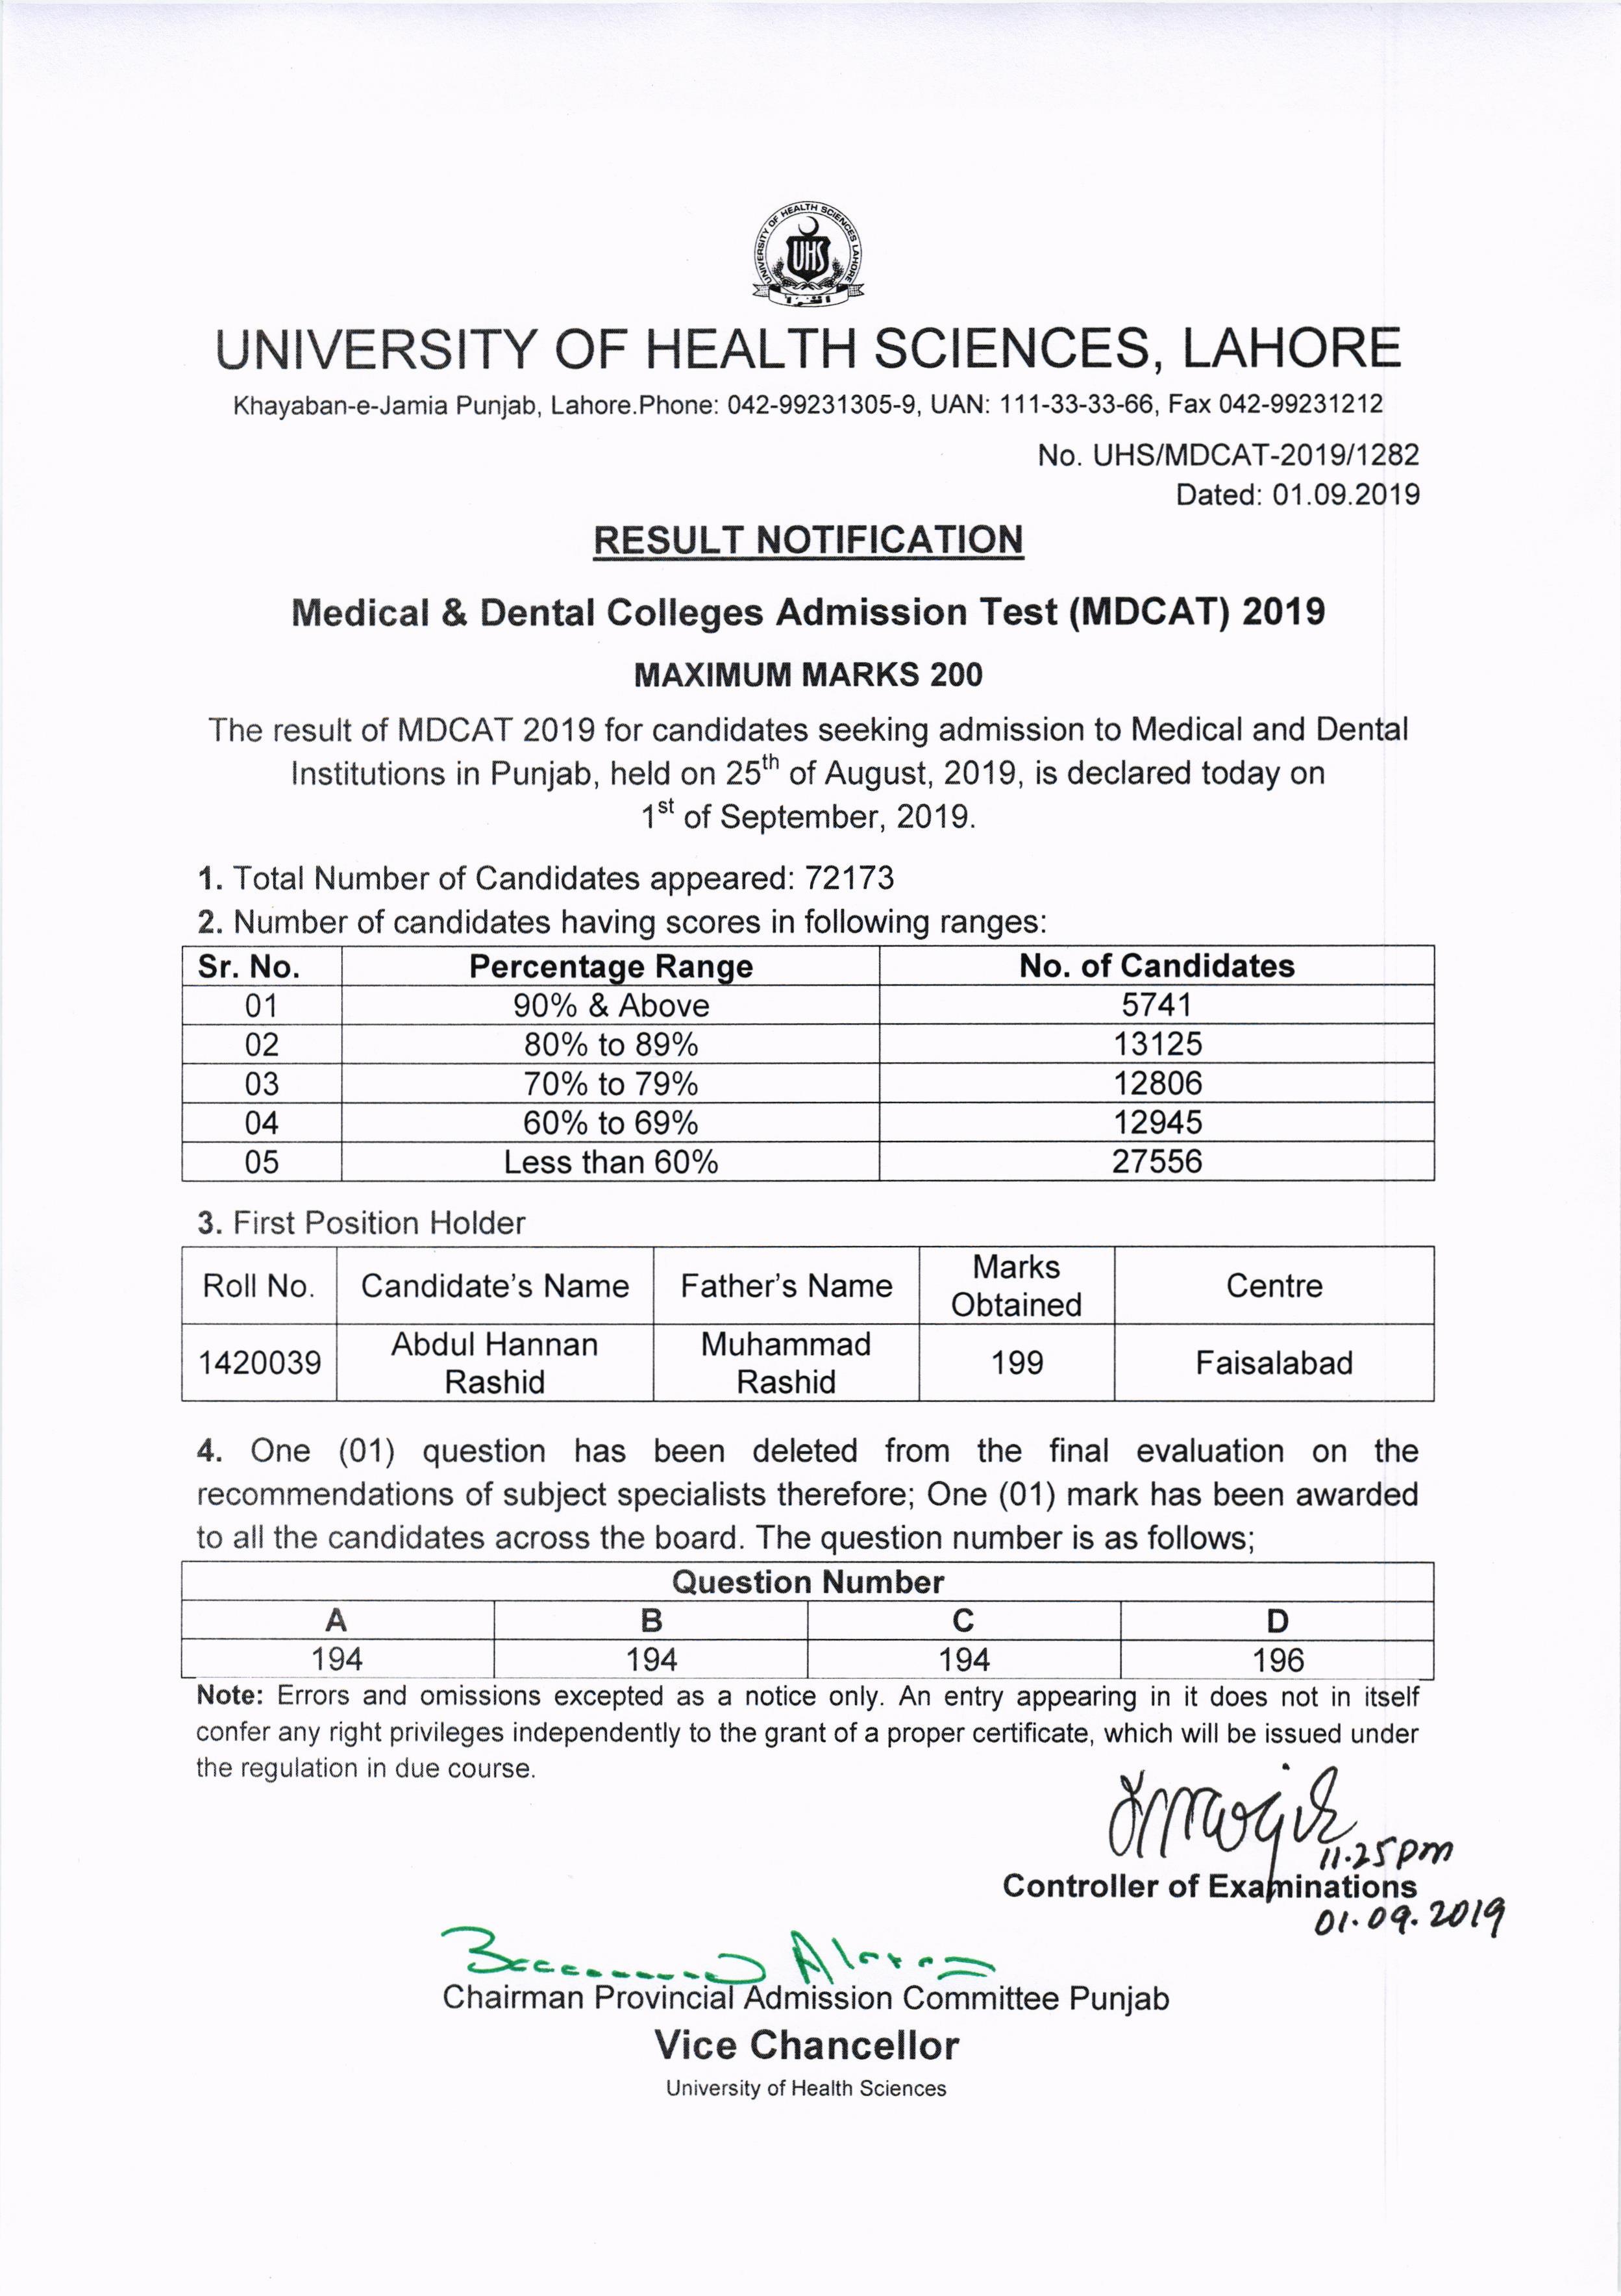 UHS has officially announced the MDCAT 2019 result